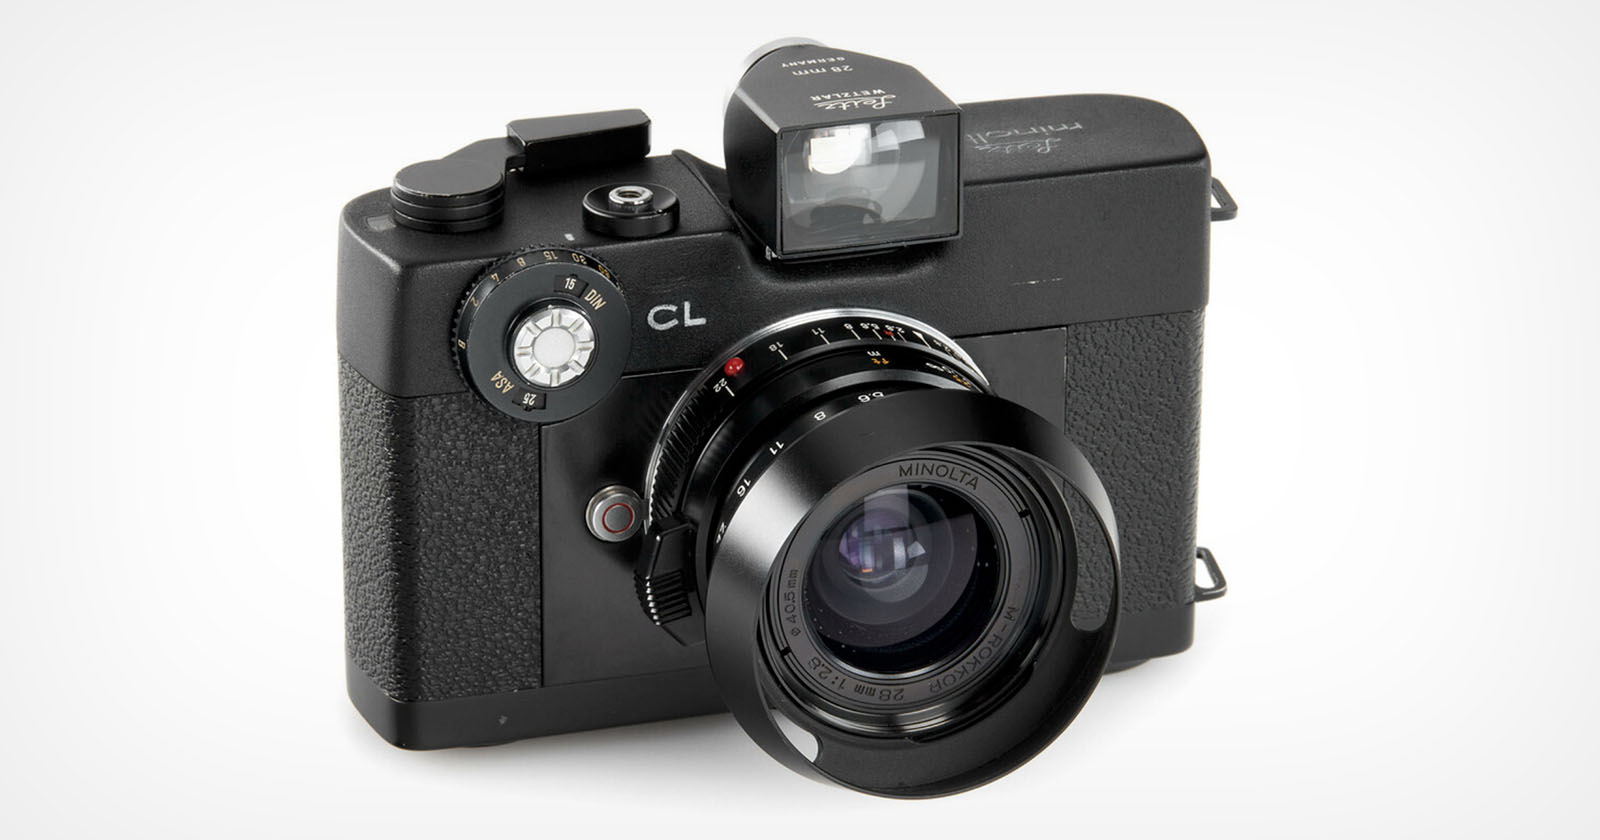  one-of-a-kind 1970 leica prototype available now 000 